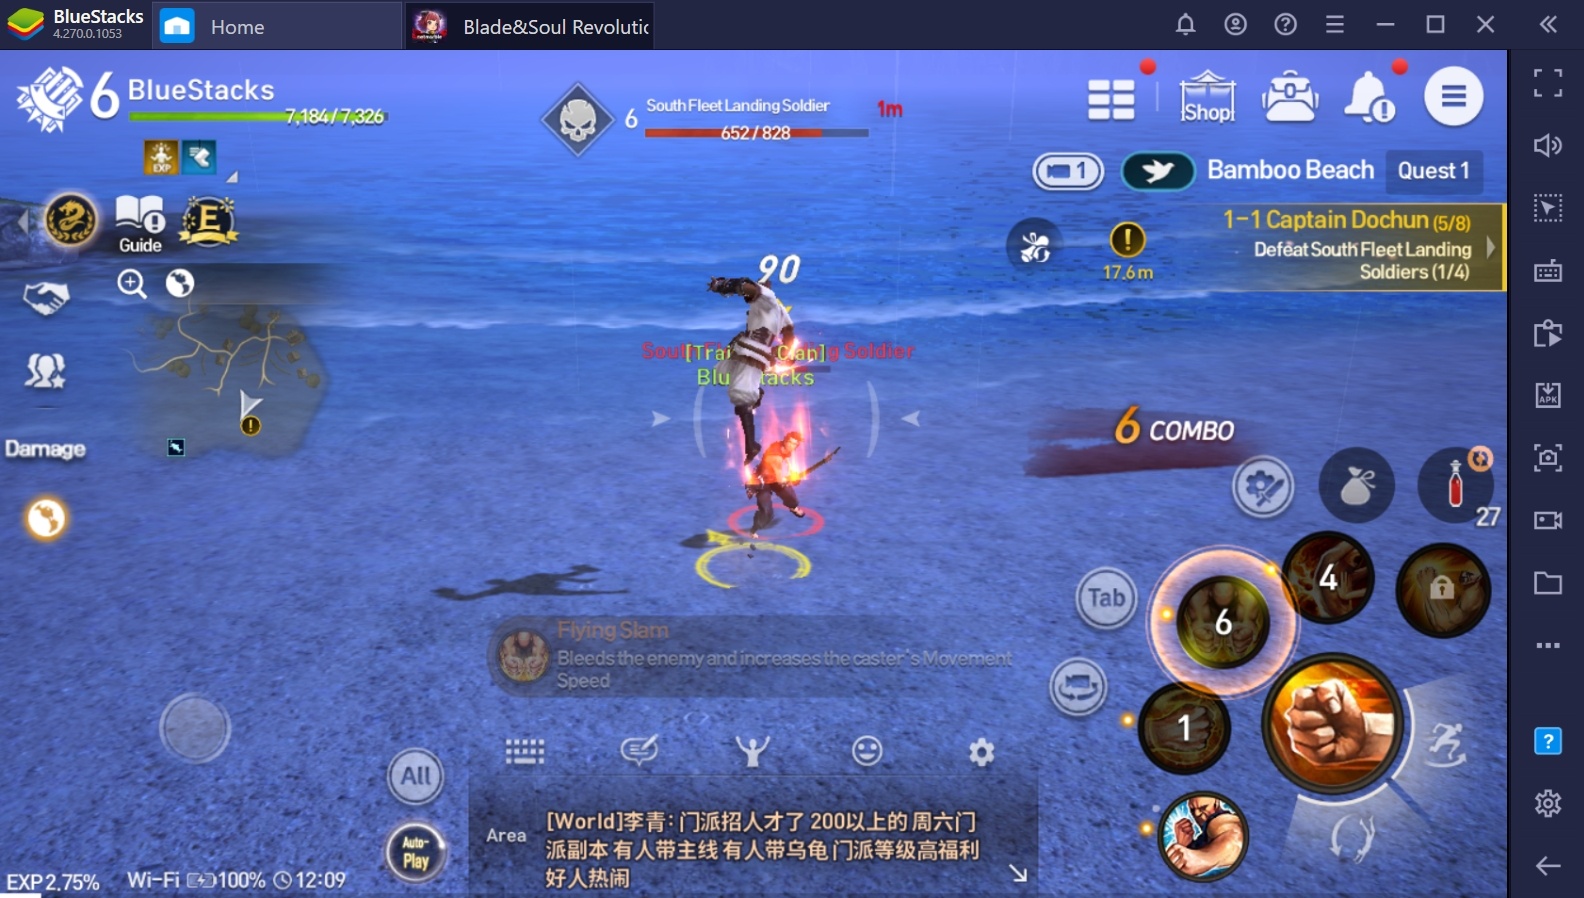 Blade and Soul: Revolution on PC - Beginners Combat Guide